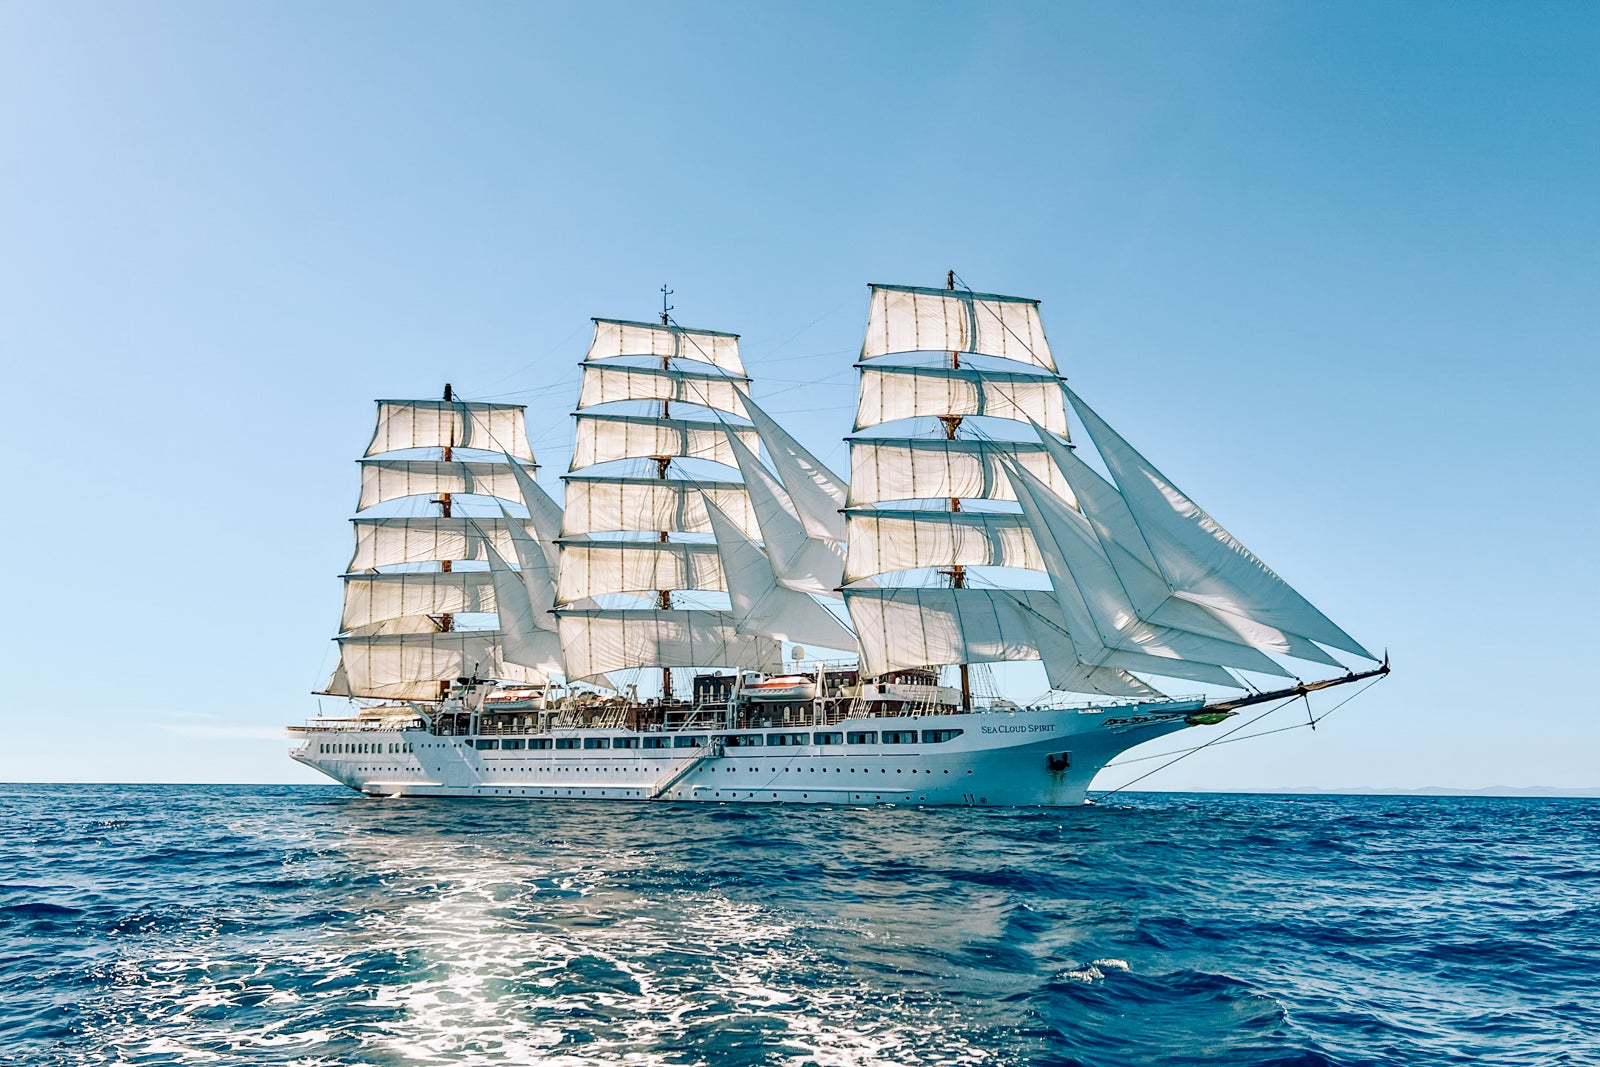 These 3 lesser-known cruise lines offer amazing voyages on sail-powered ships